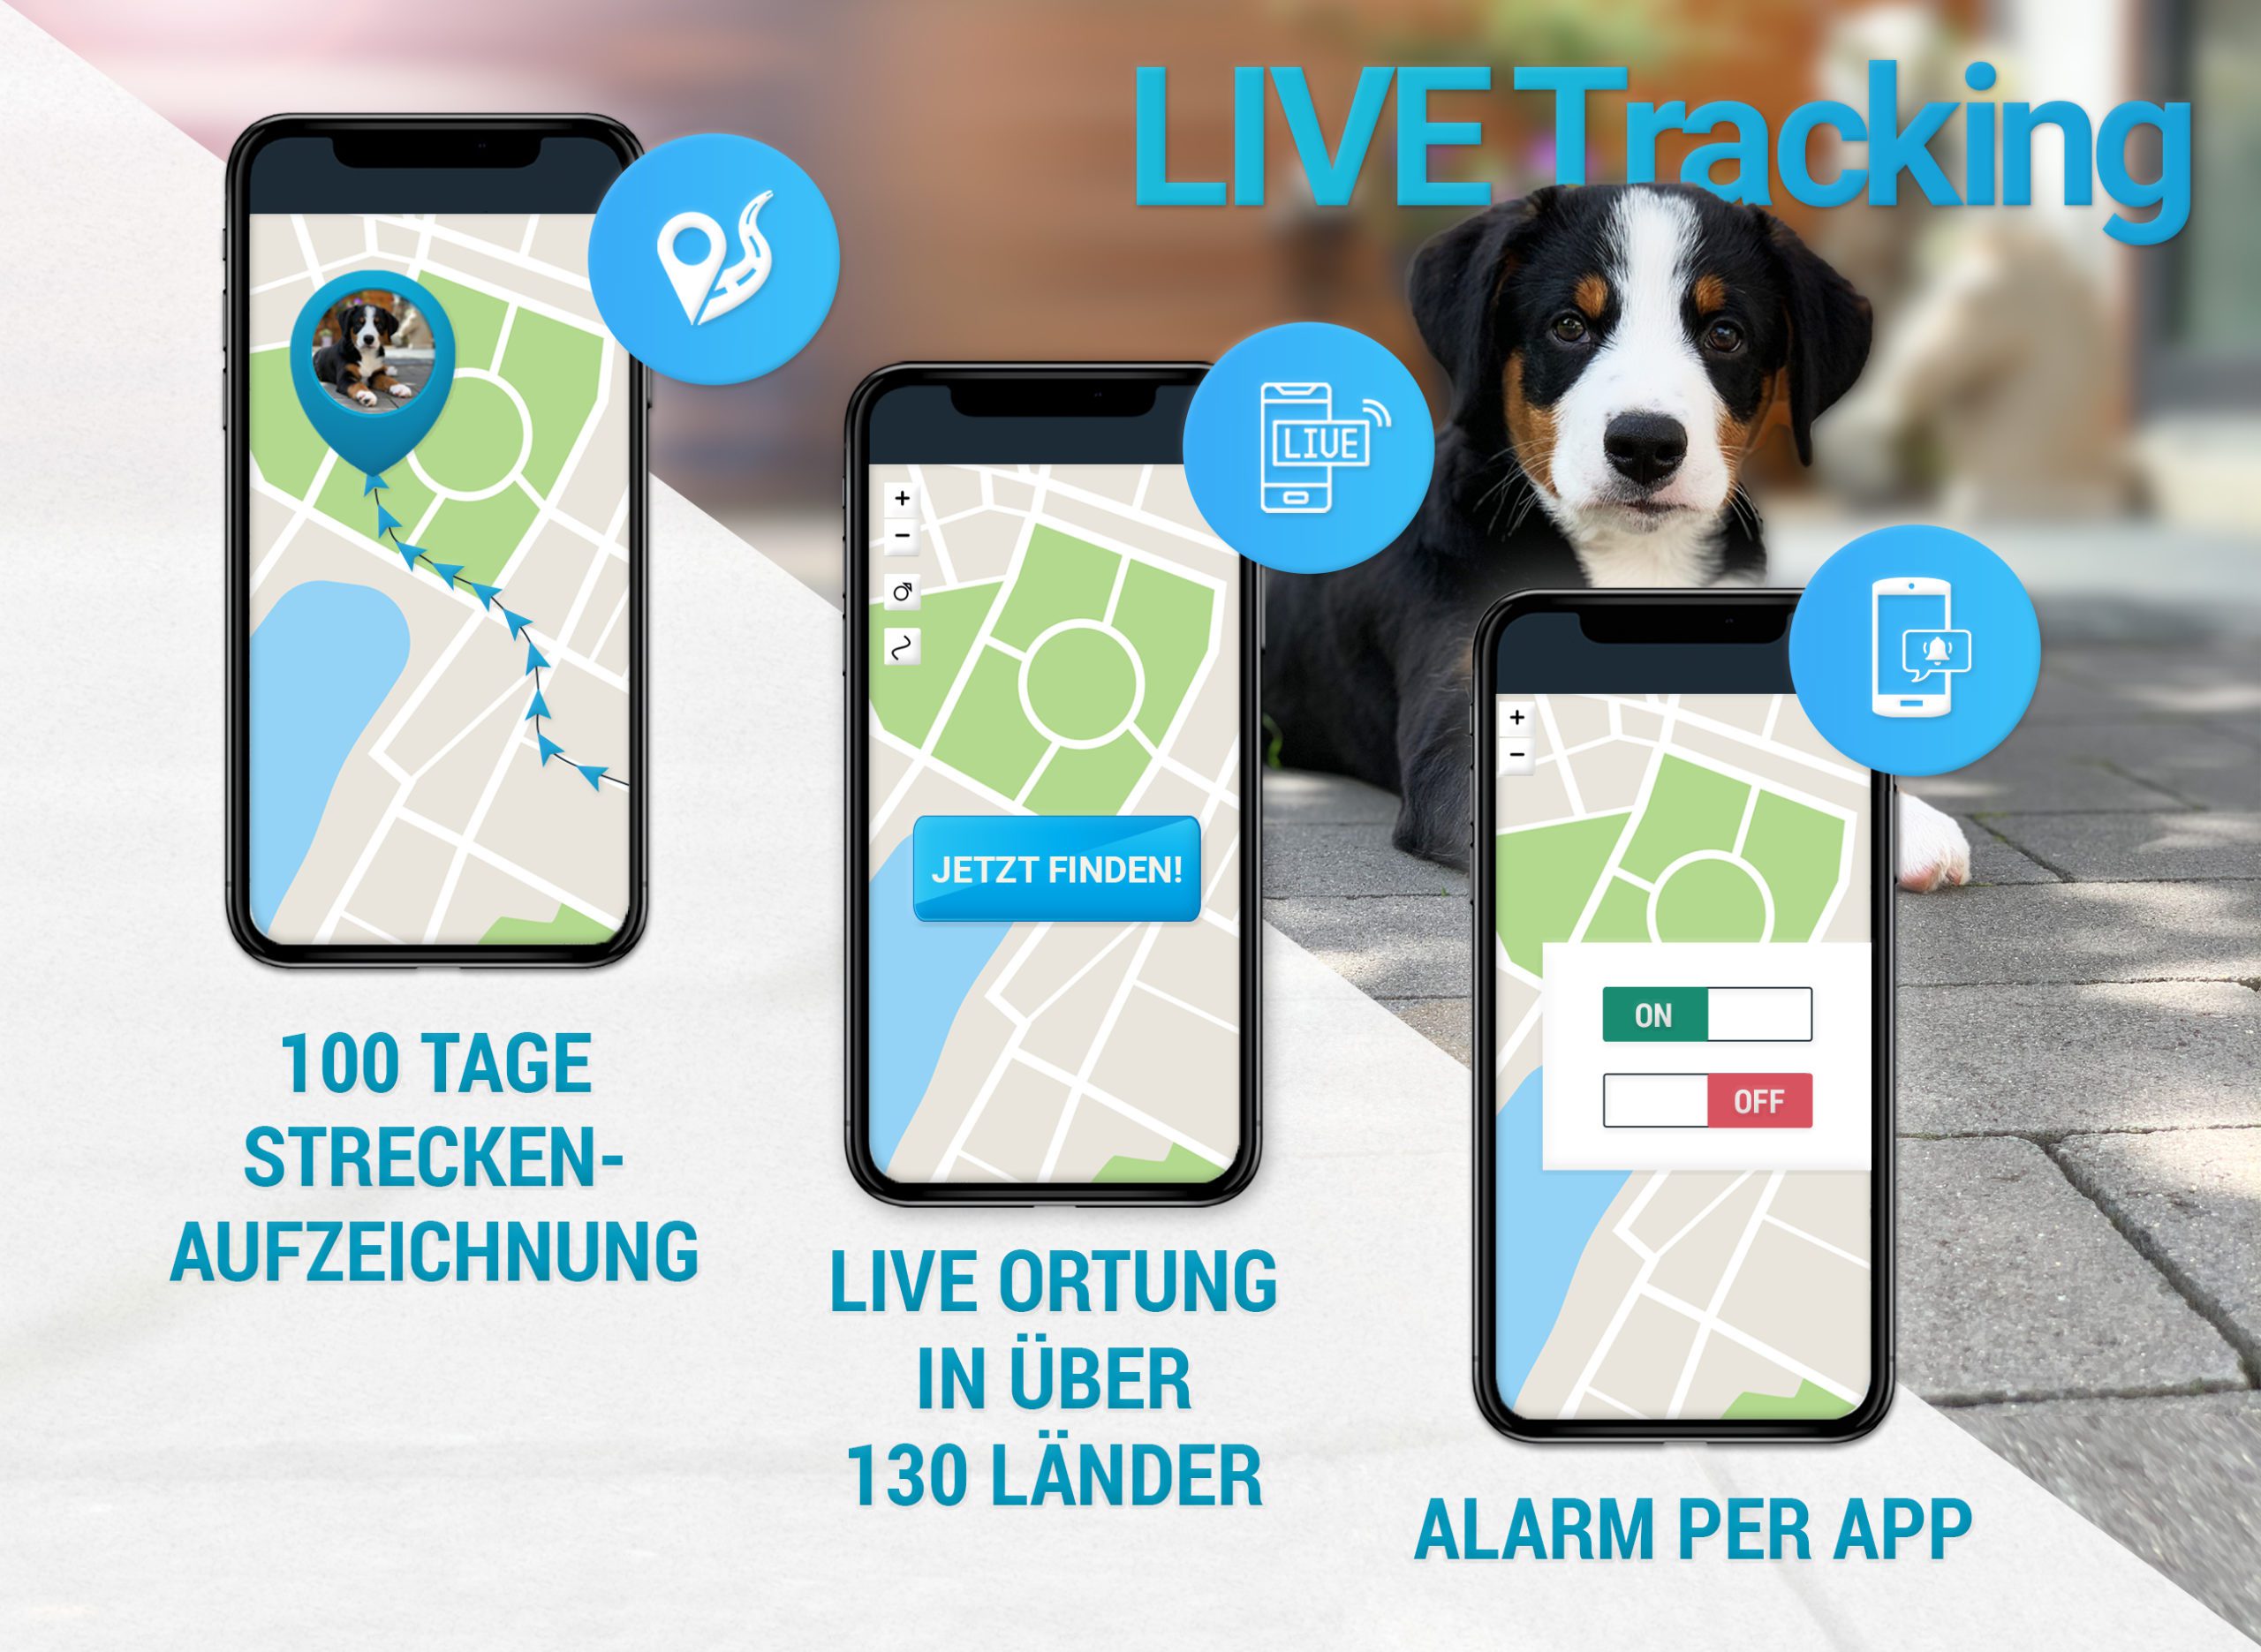 6.Live Tracking scaled - 6.Live_Tracking